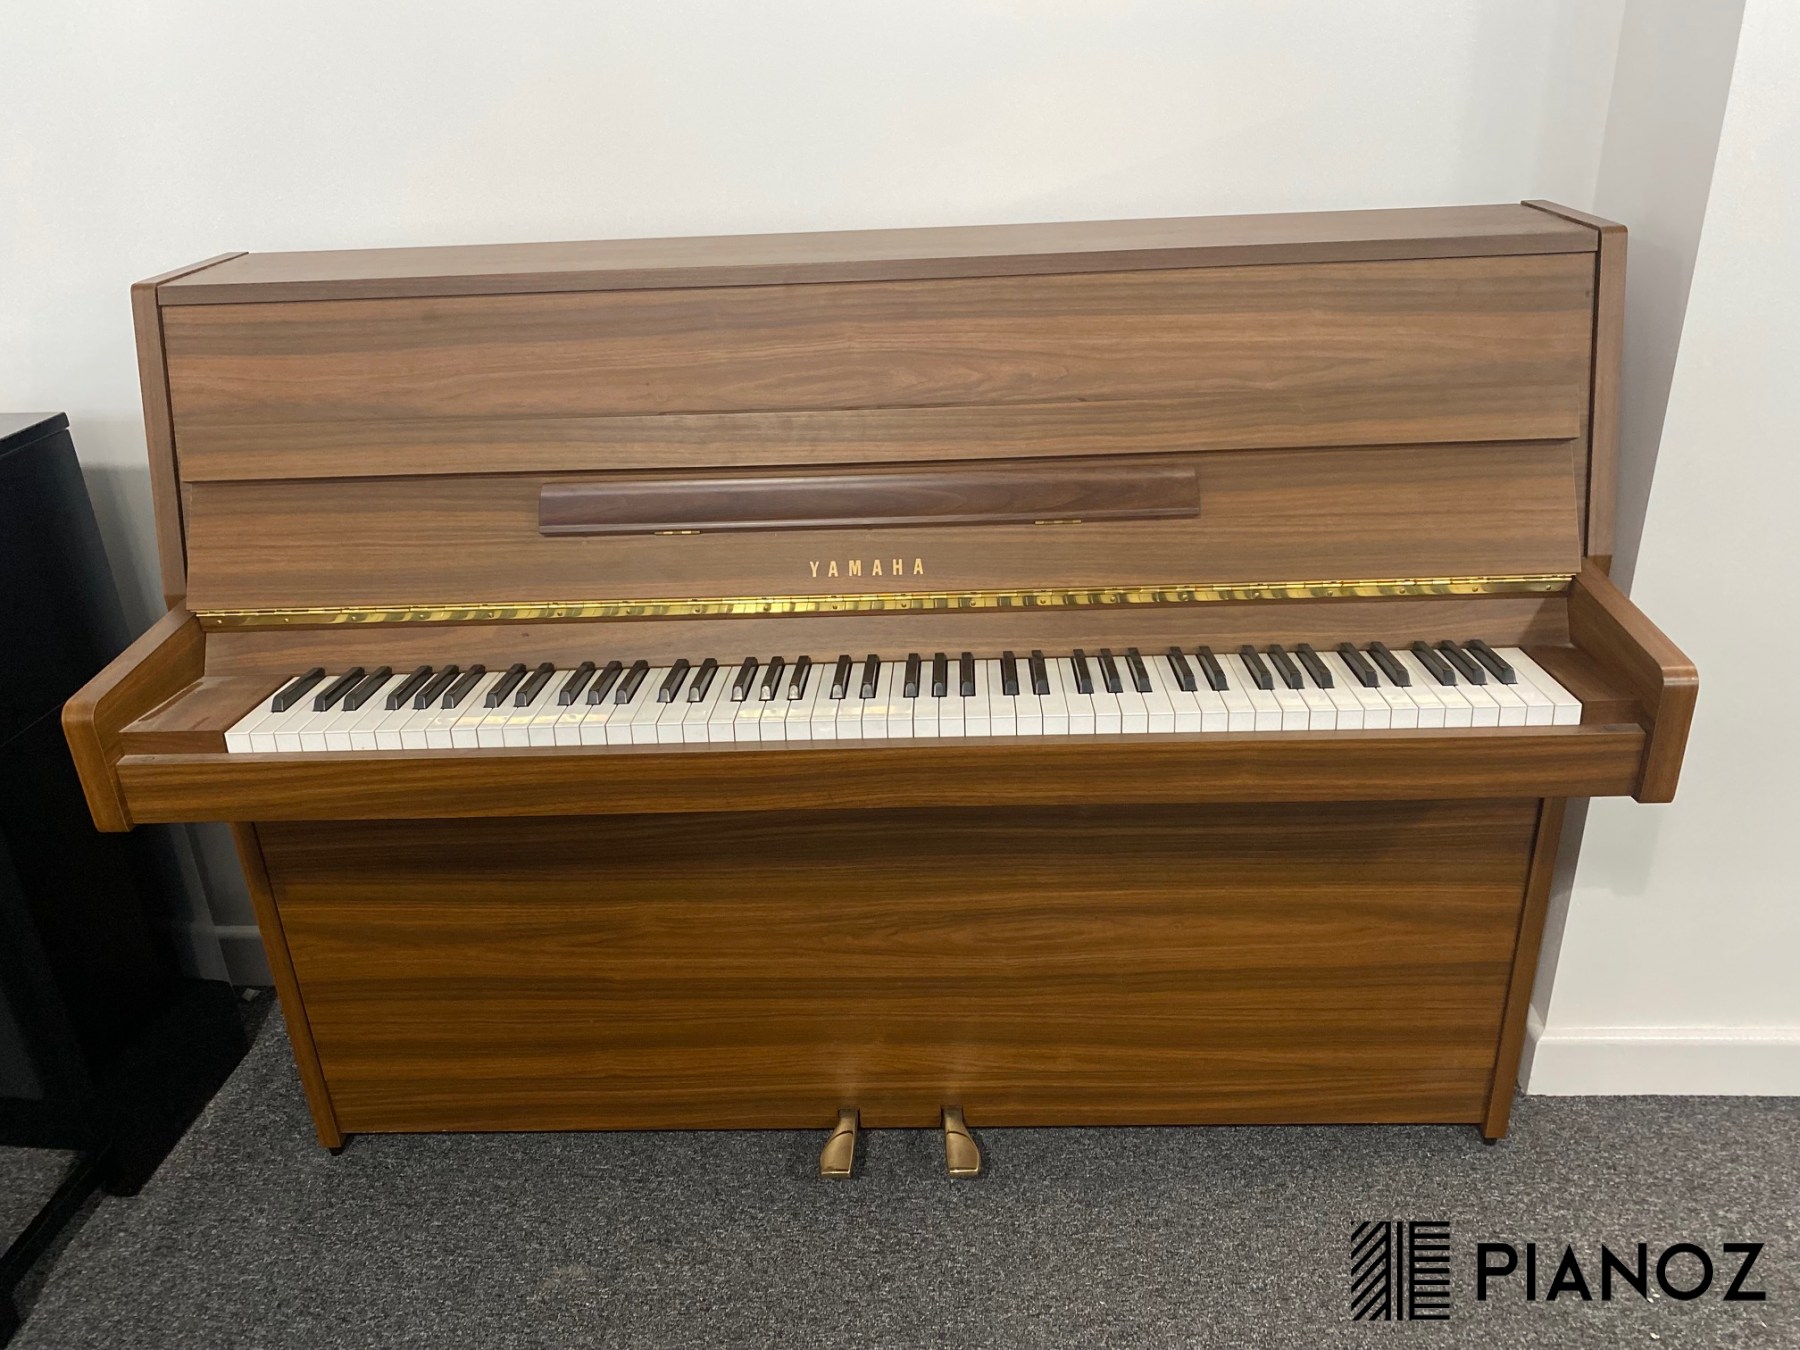 Yamaha E108 Japanese Upright Piano piano for sale in UK